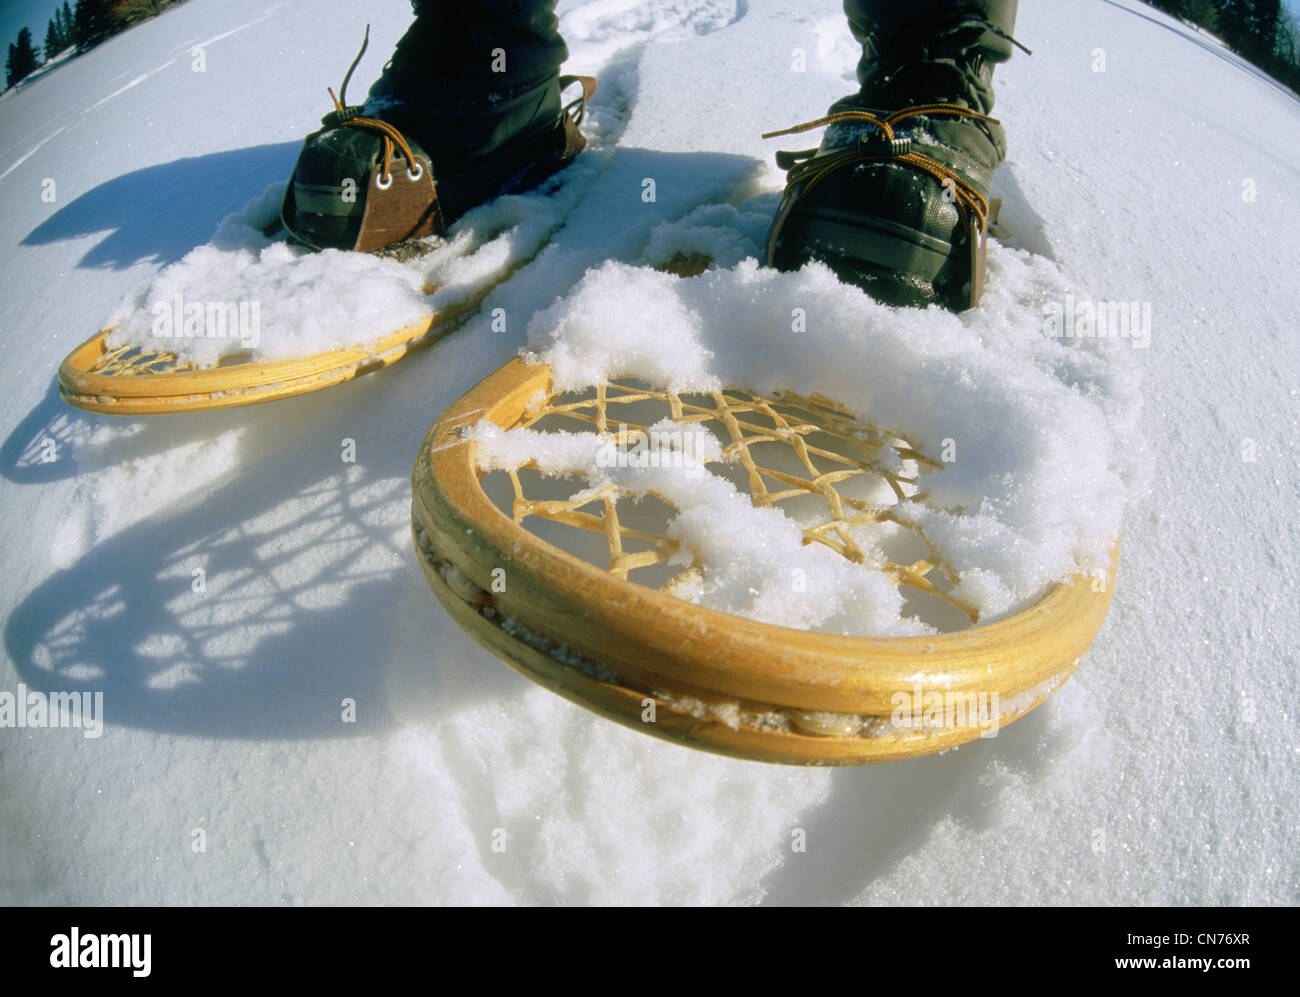 Snowshoes Stock Photo